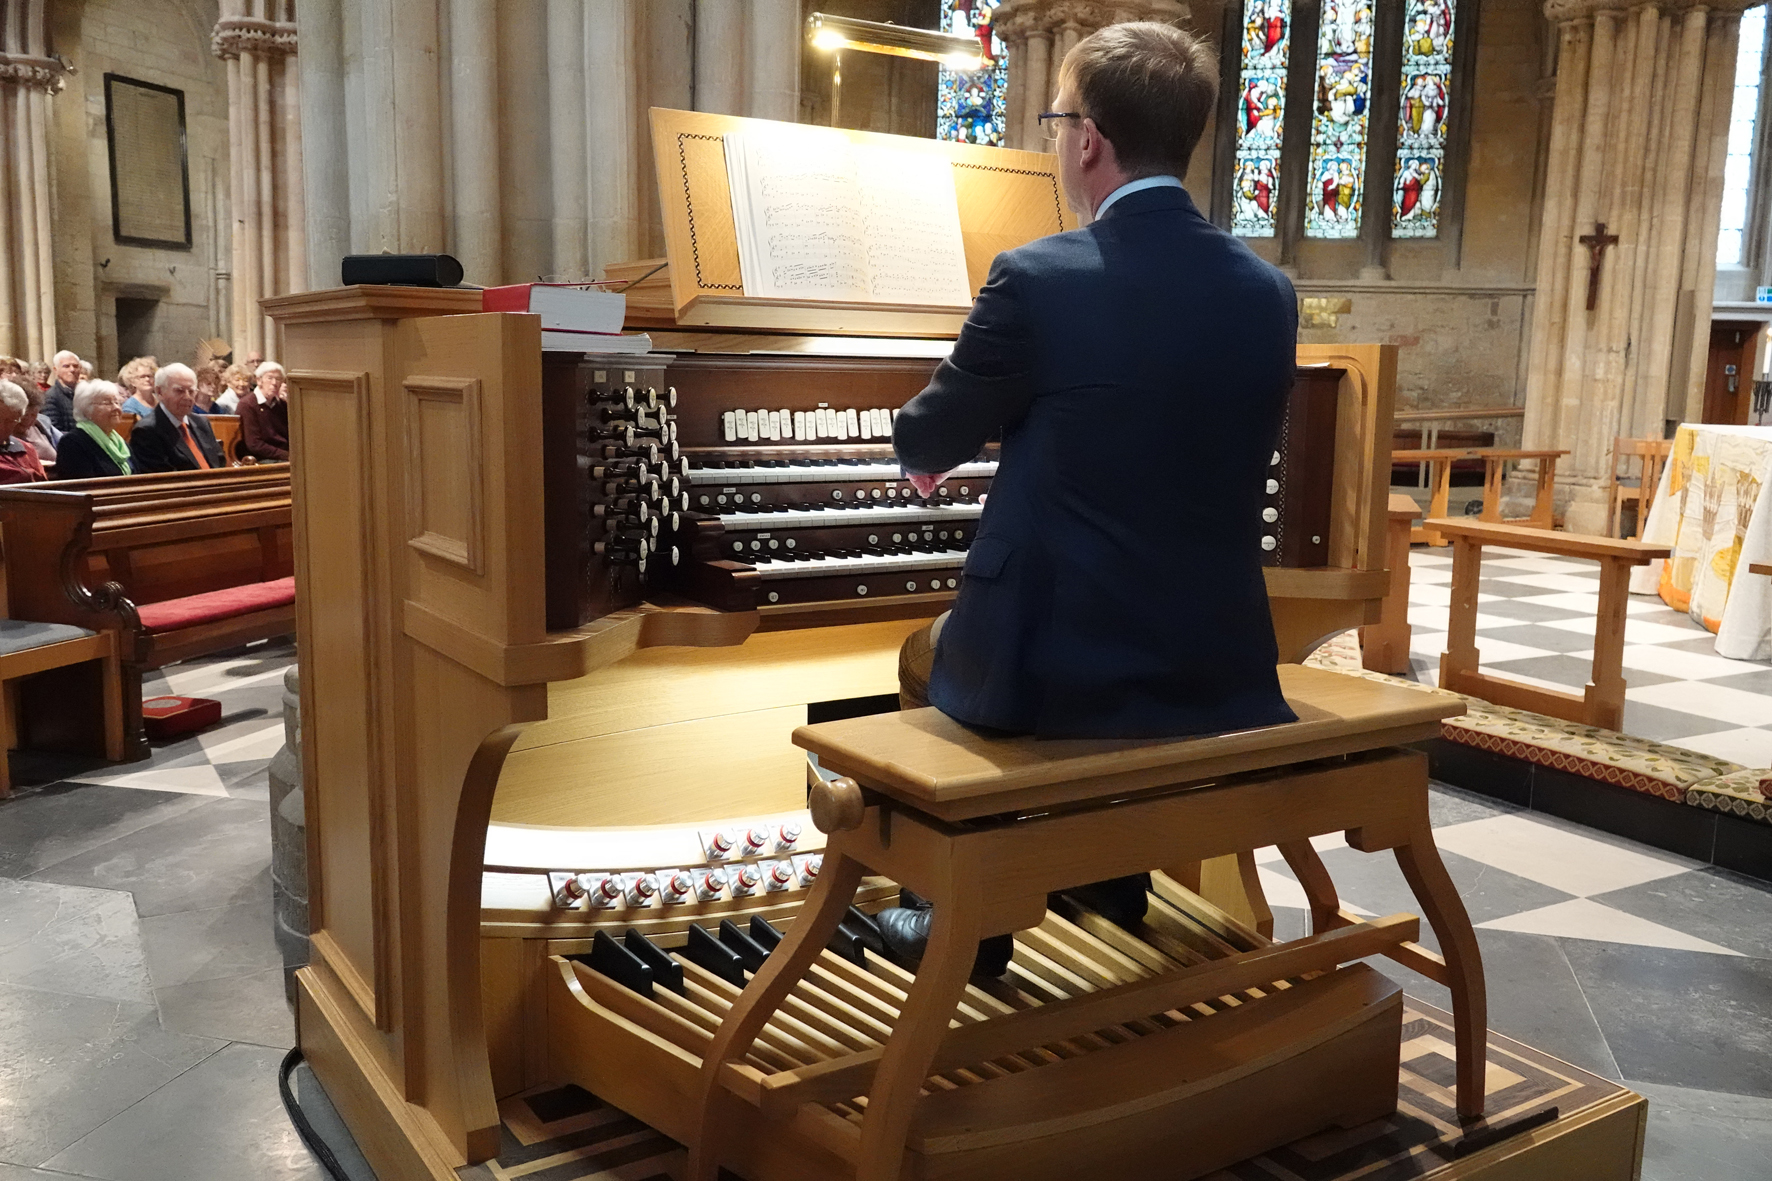 Organist Robert Quinney sat playing the new organ in Pershore Abbey